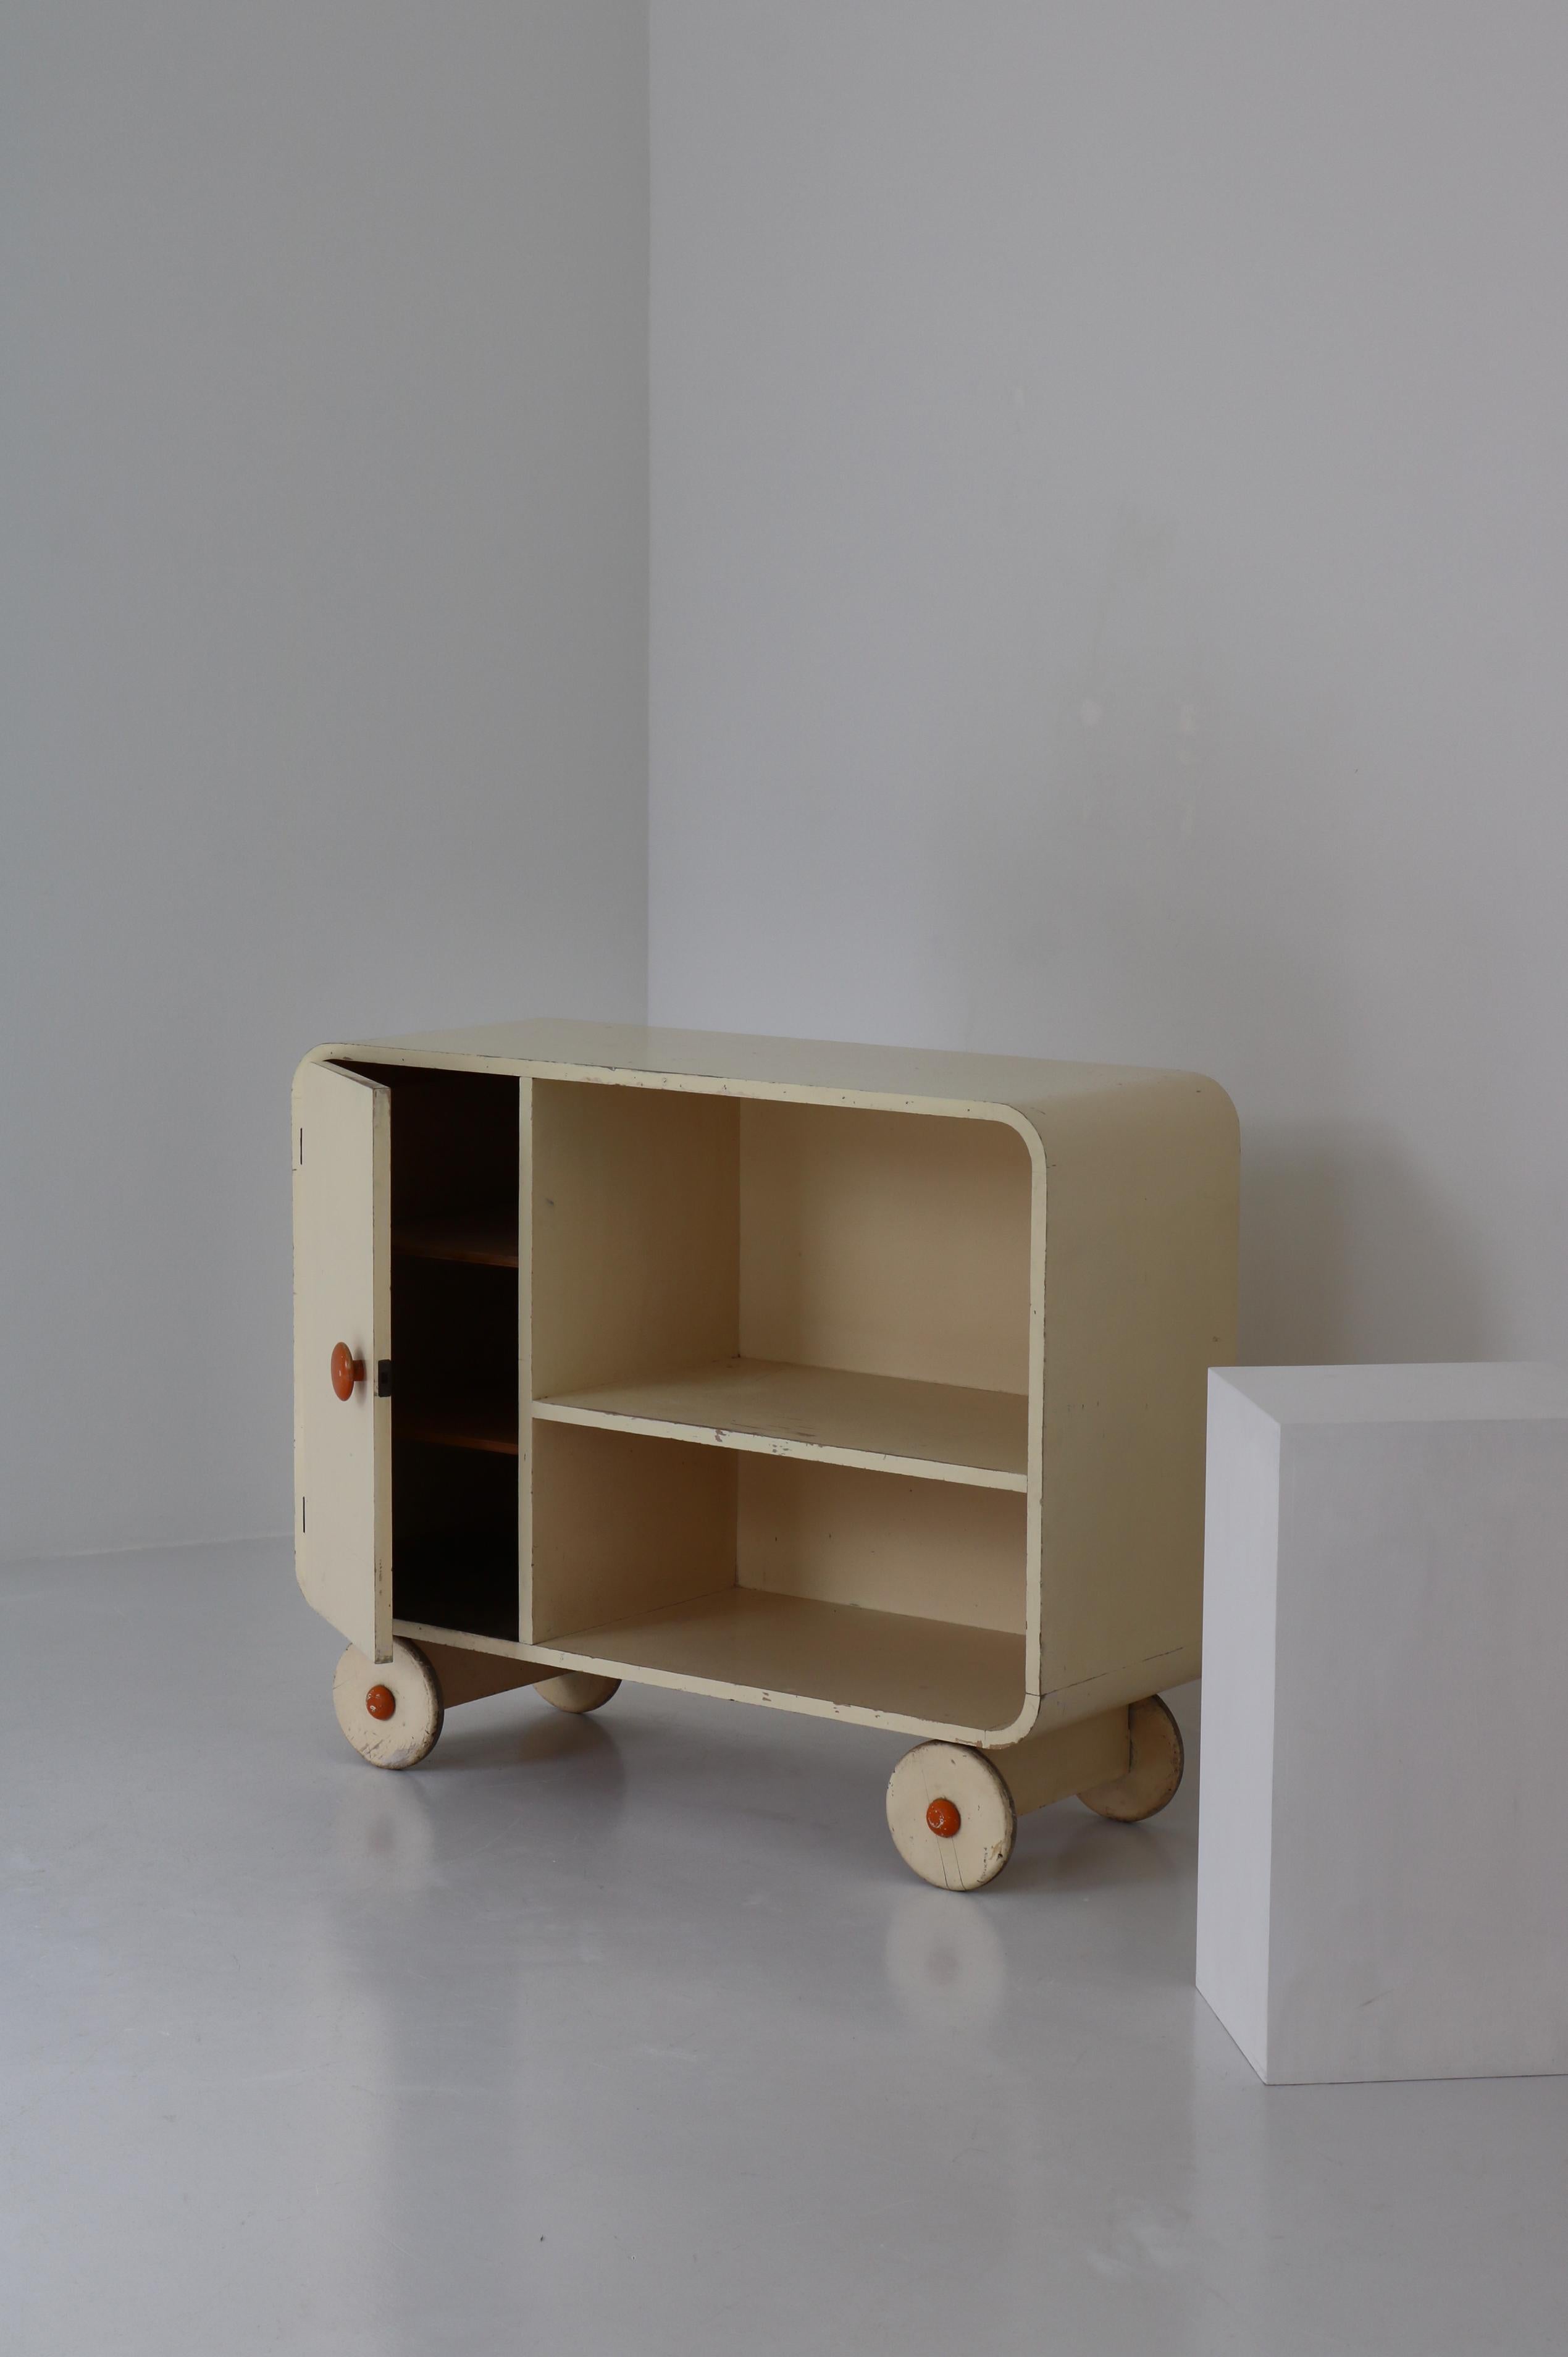 Scandinavian Modern Sideboard or Cabinet on Wheels, 1930s Functionalism In Fair Condition For Sale In Odense, DK